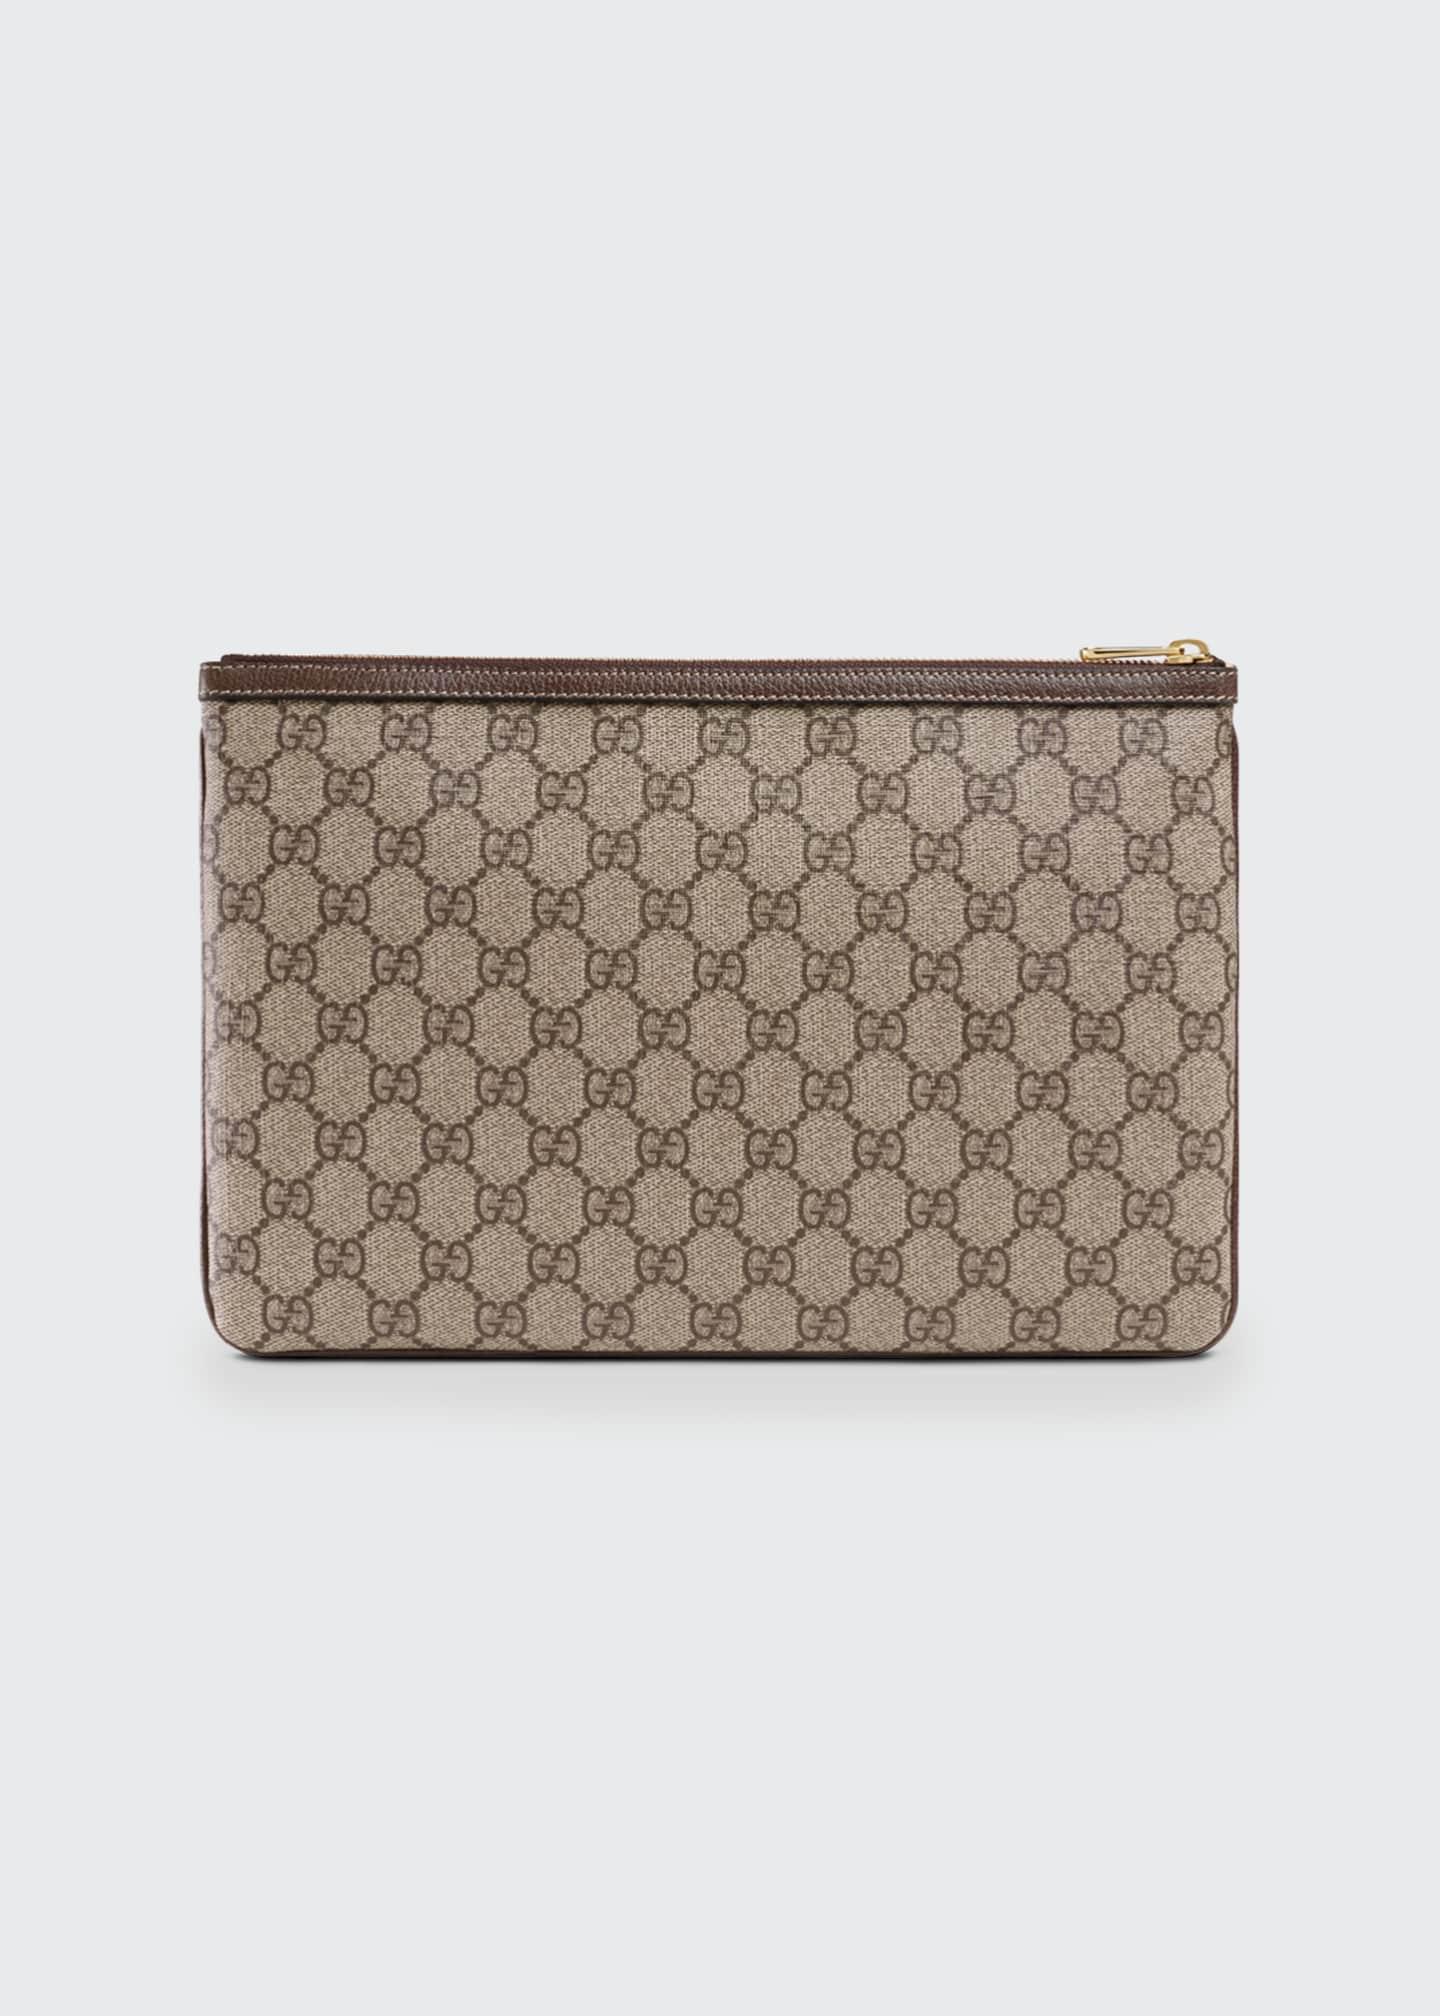 Gucci GUCCI Pouch Ladies Ophidia GG Supreme Brown Beige 548393